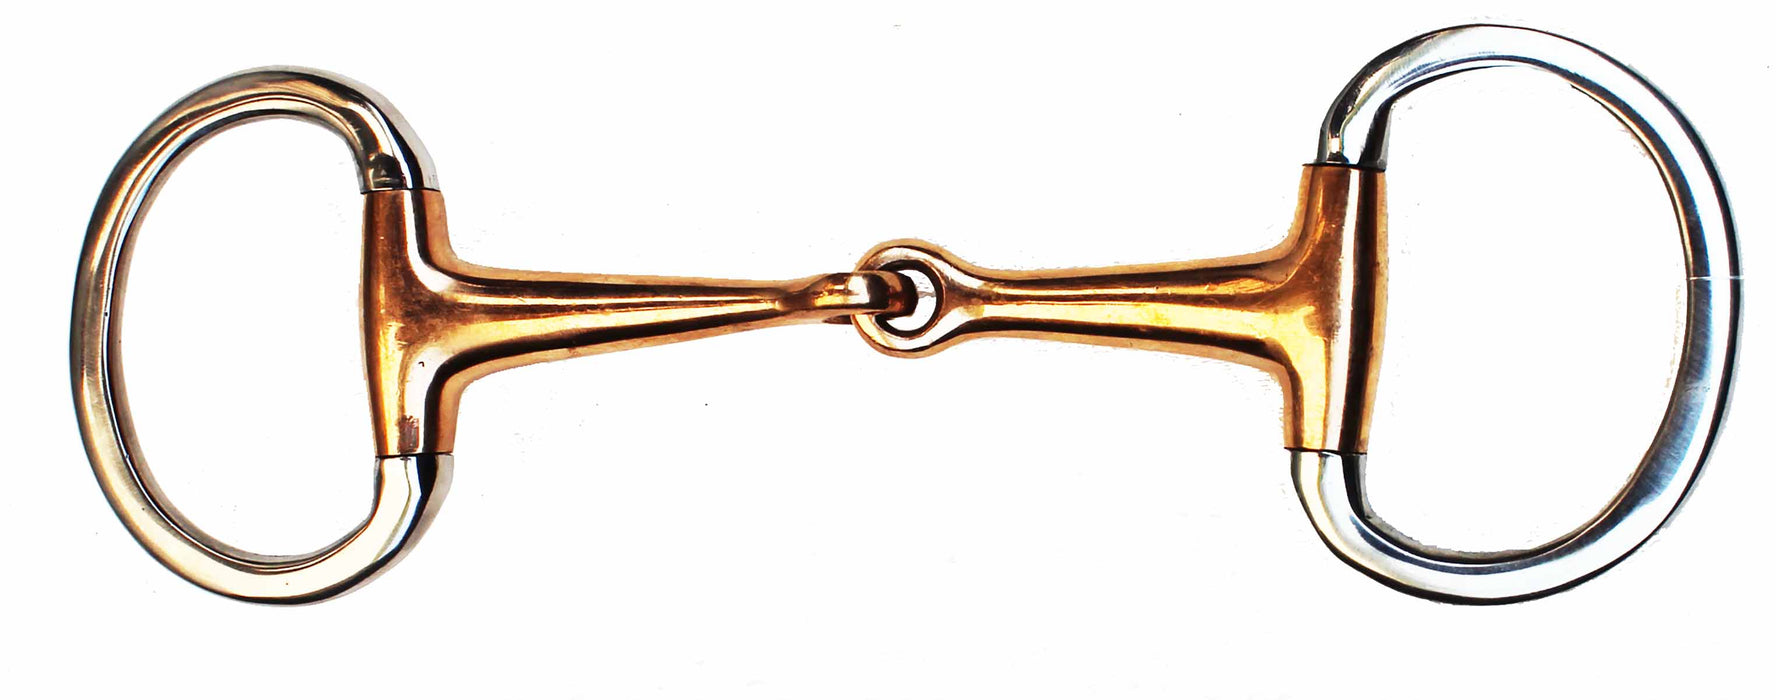 SS Eggbutt Single Jointed Copper Mouth Snaffle Training Bit 35640